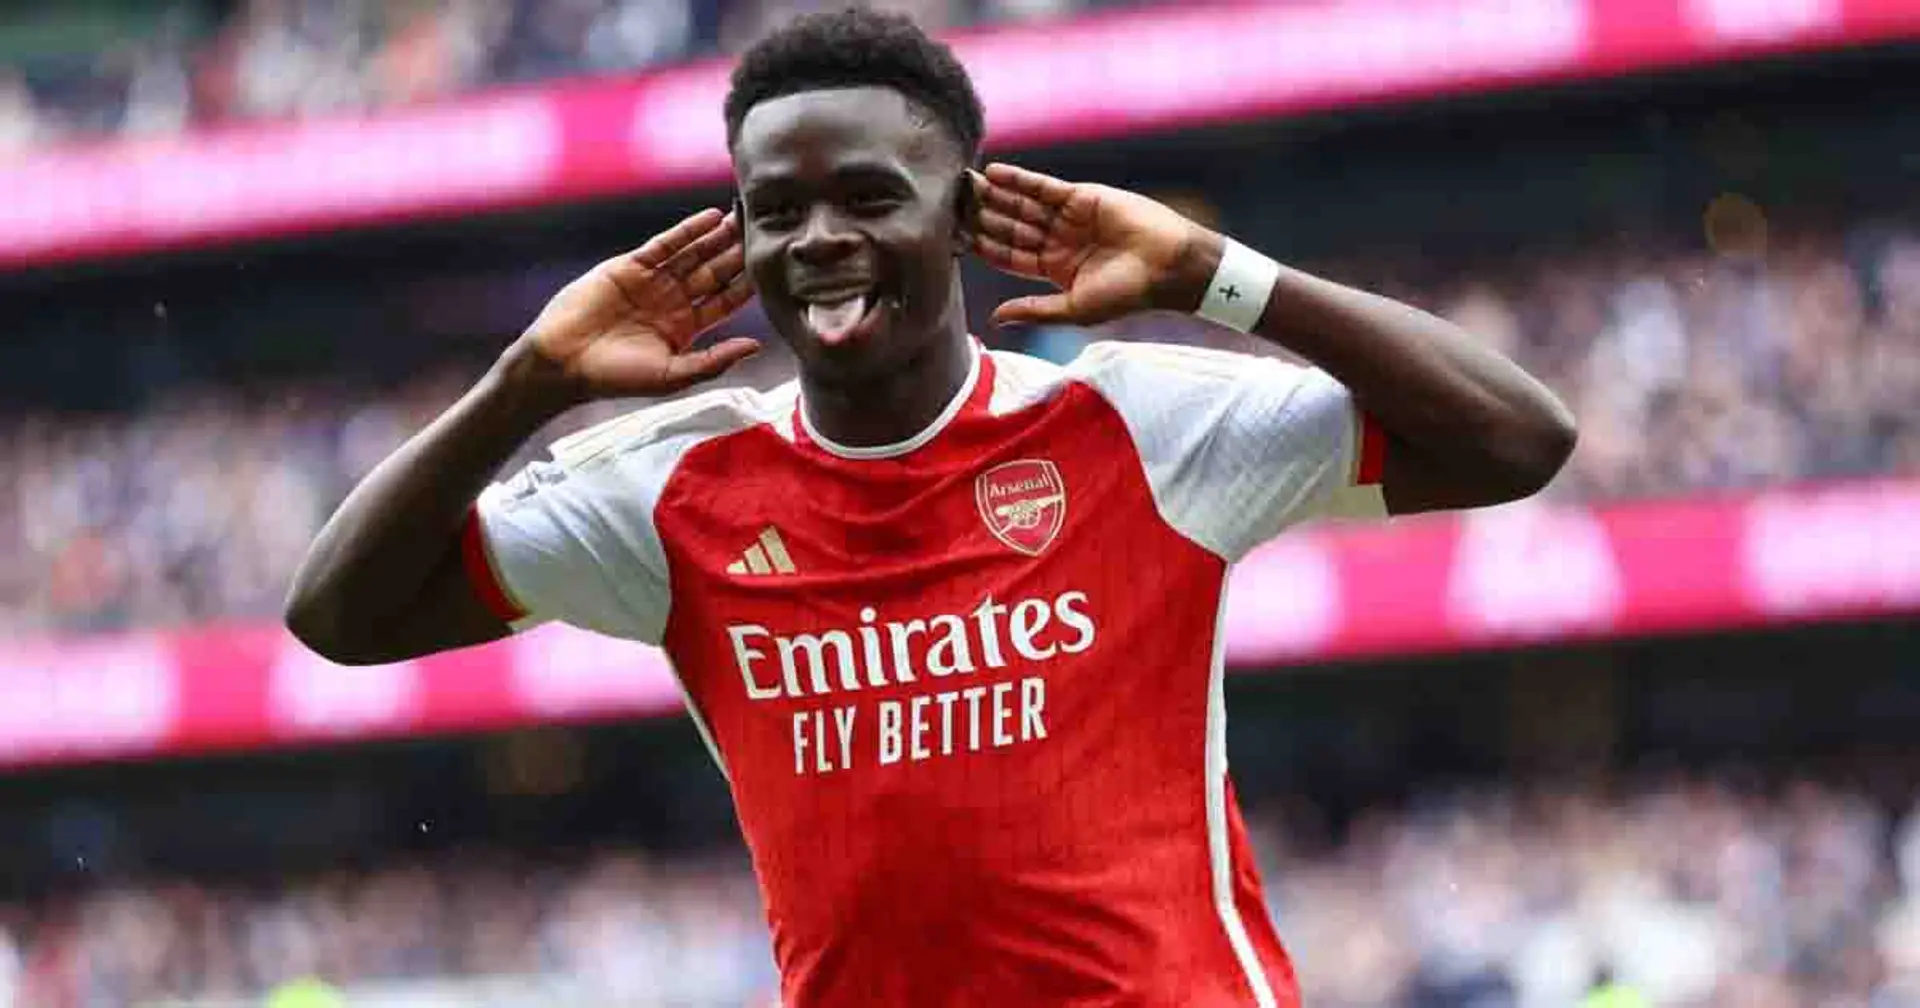 Bukayo Saka matches 20-year-old North London derby feat with slick goal vs Spurs